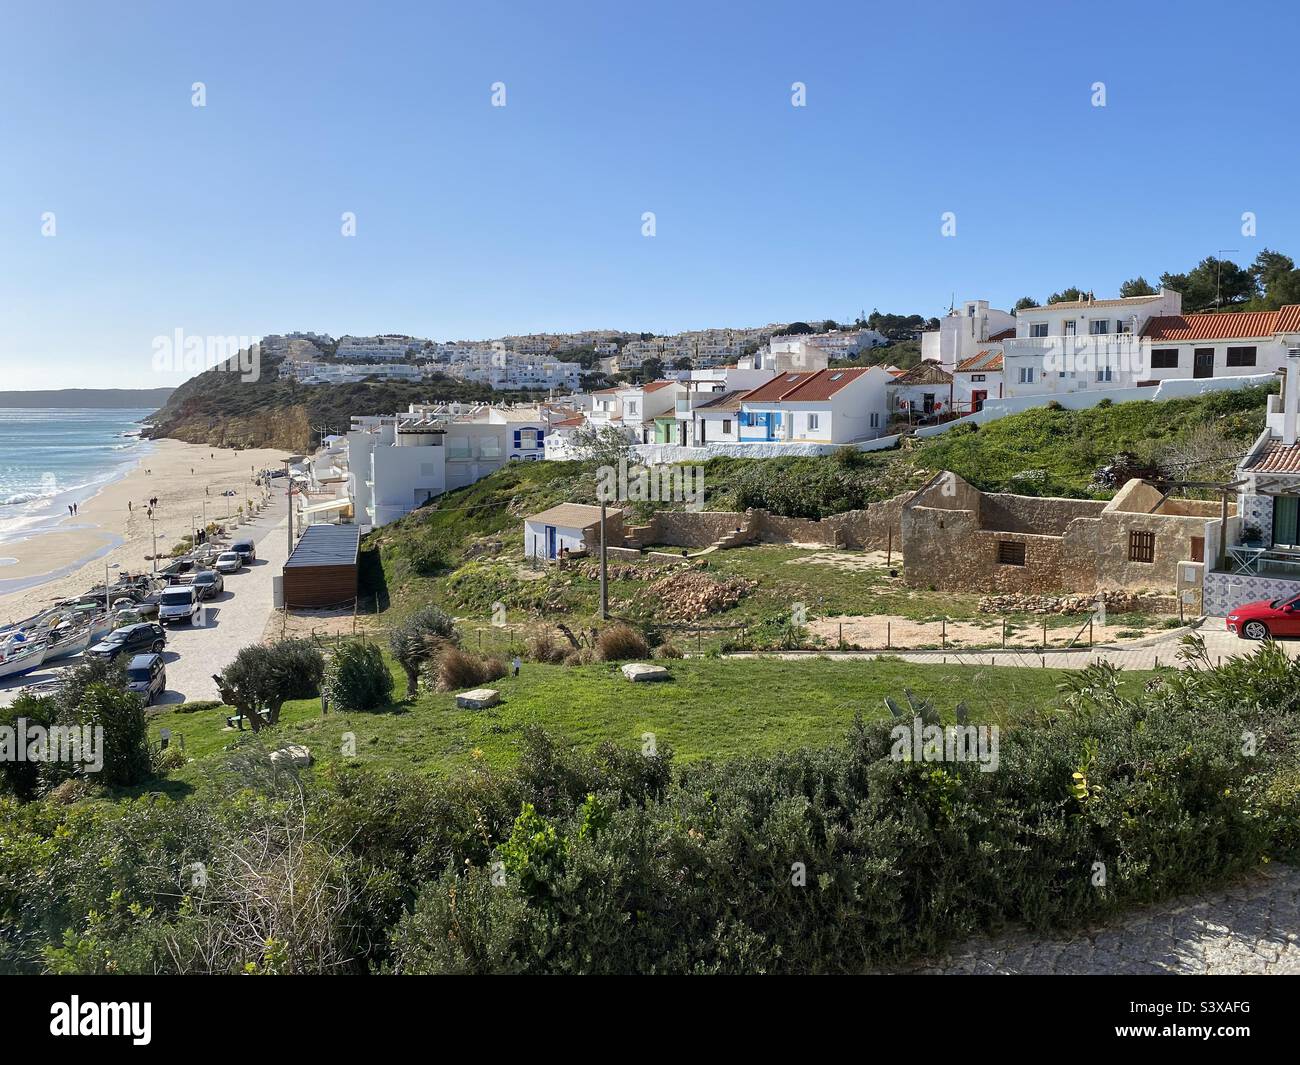 Fishing town of Salema in Portugal Stock Photo